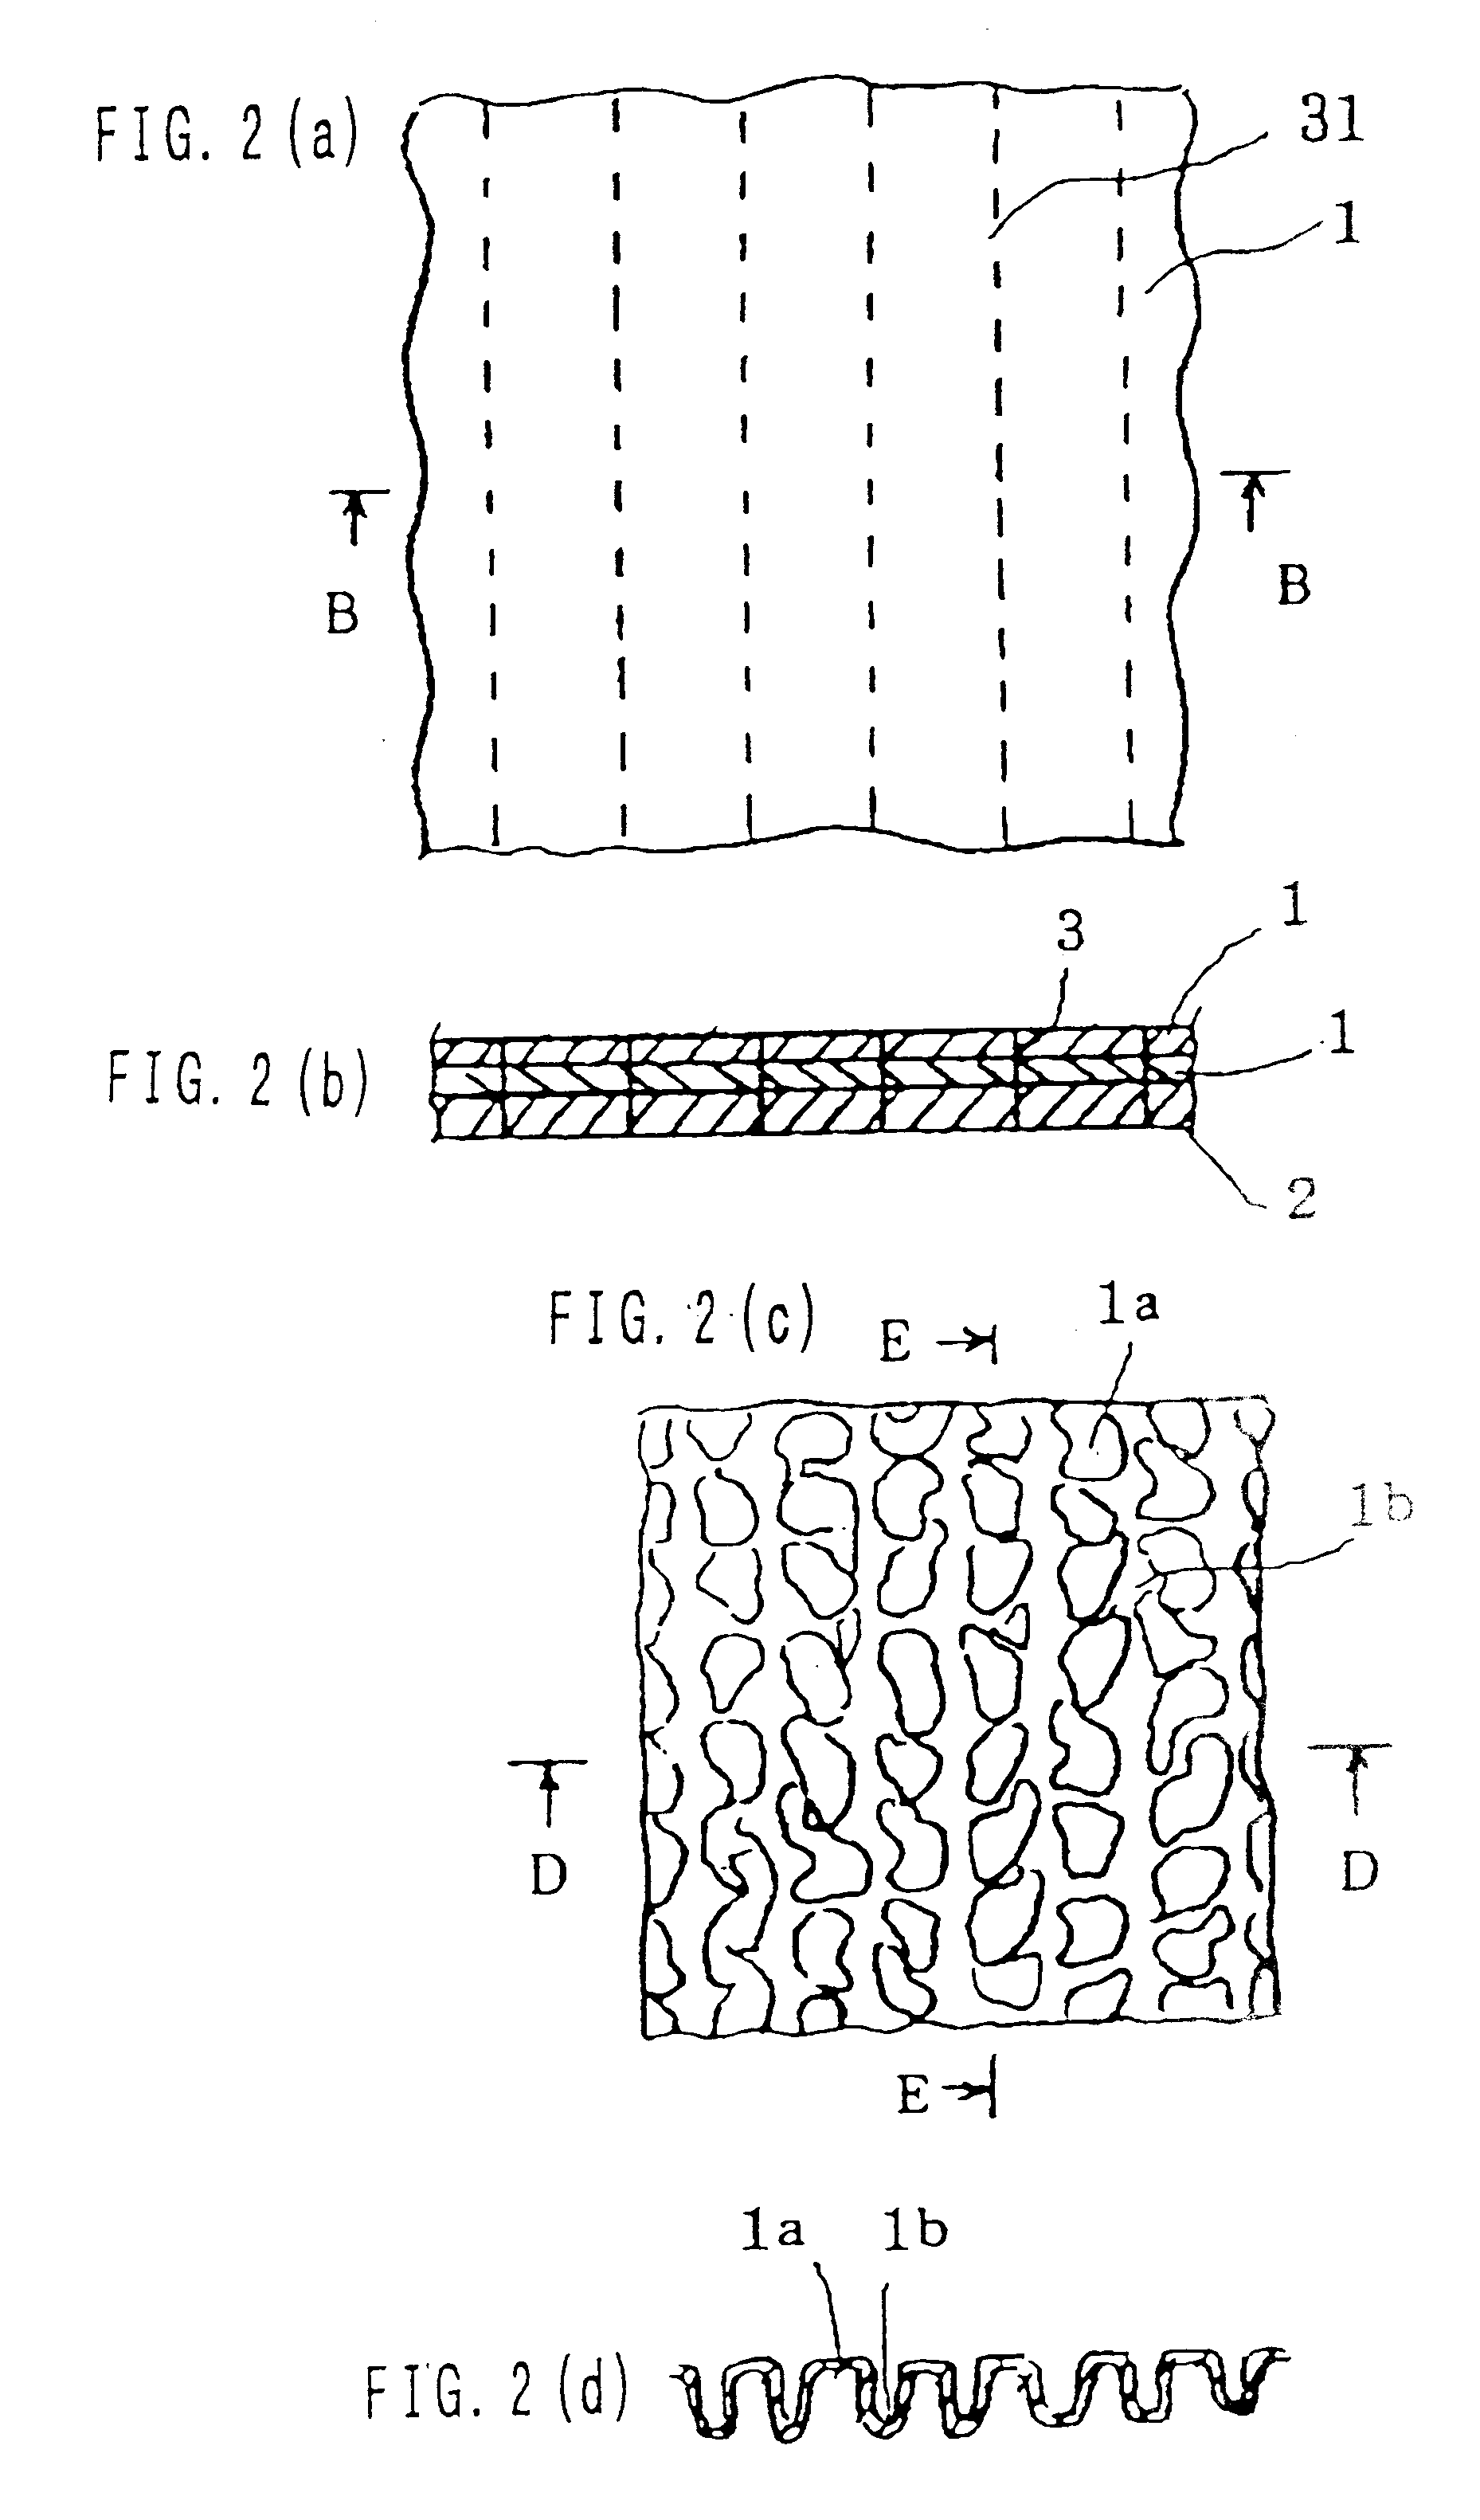 Method of making convexities and/or concavities on cloths of a garment